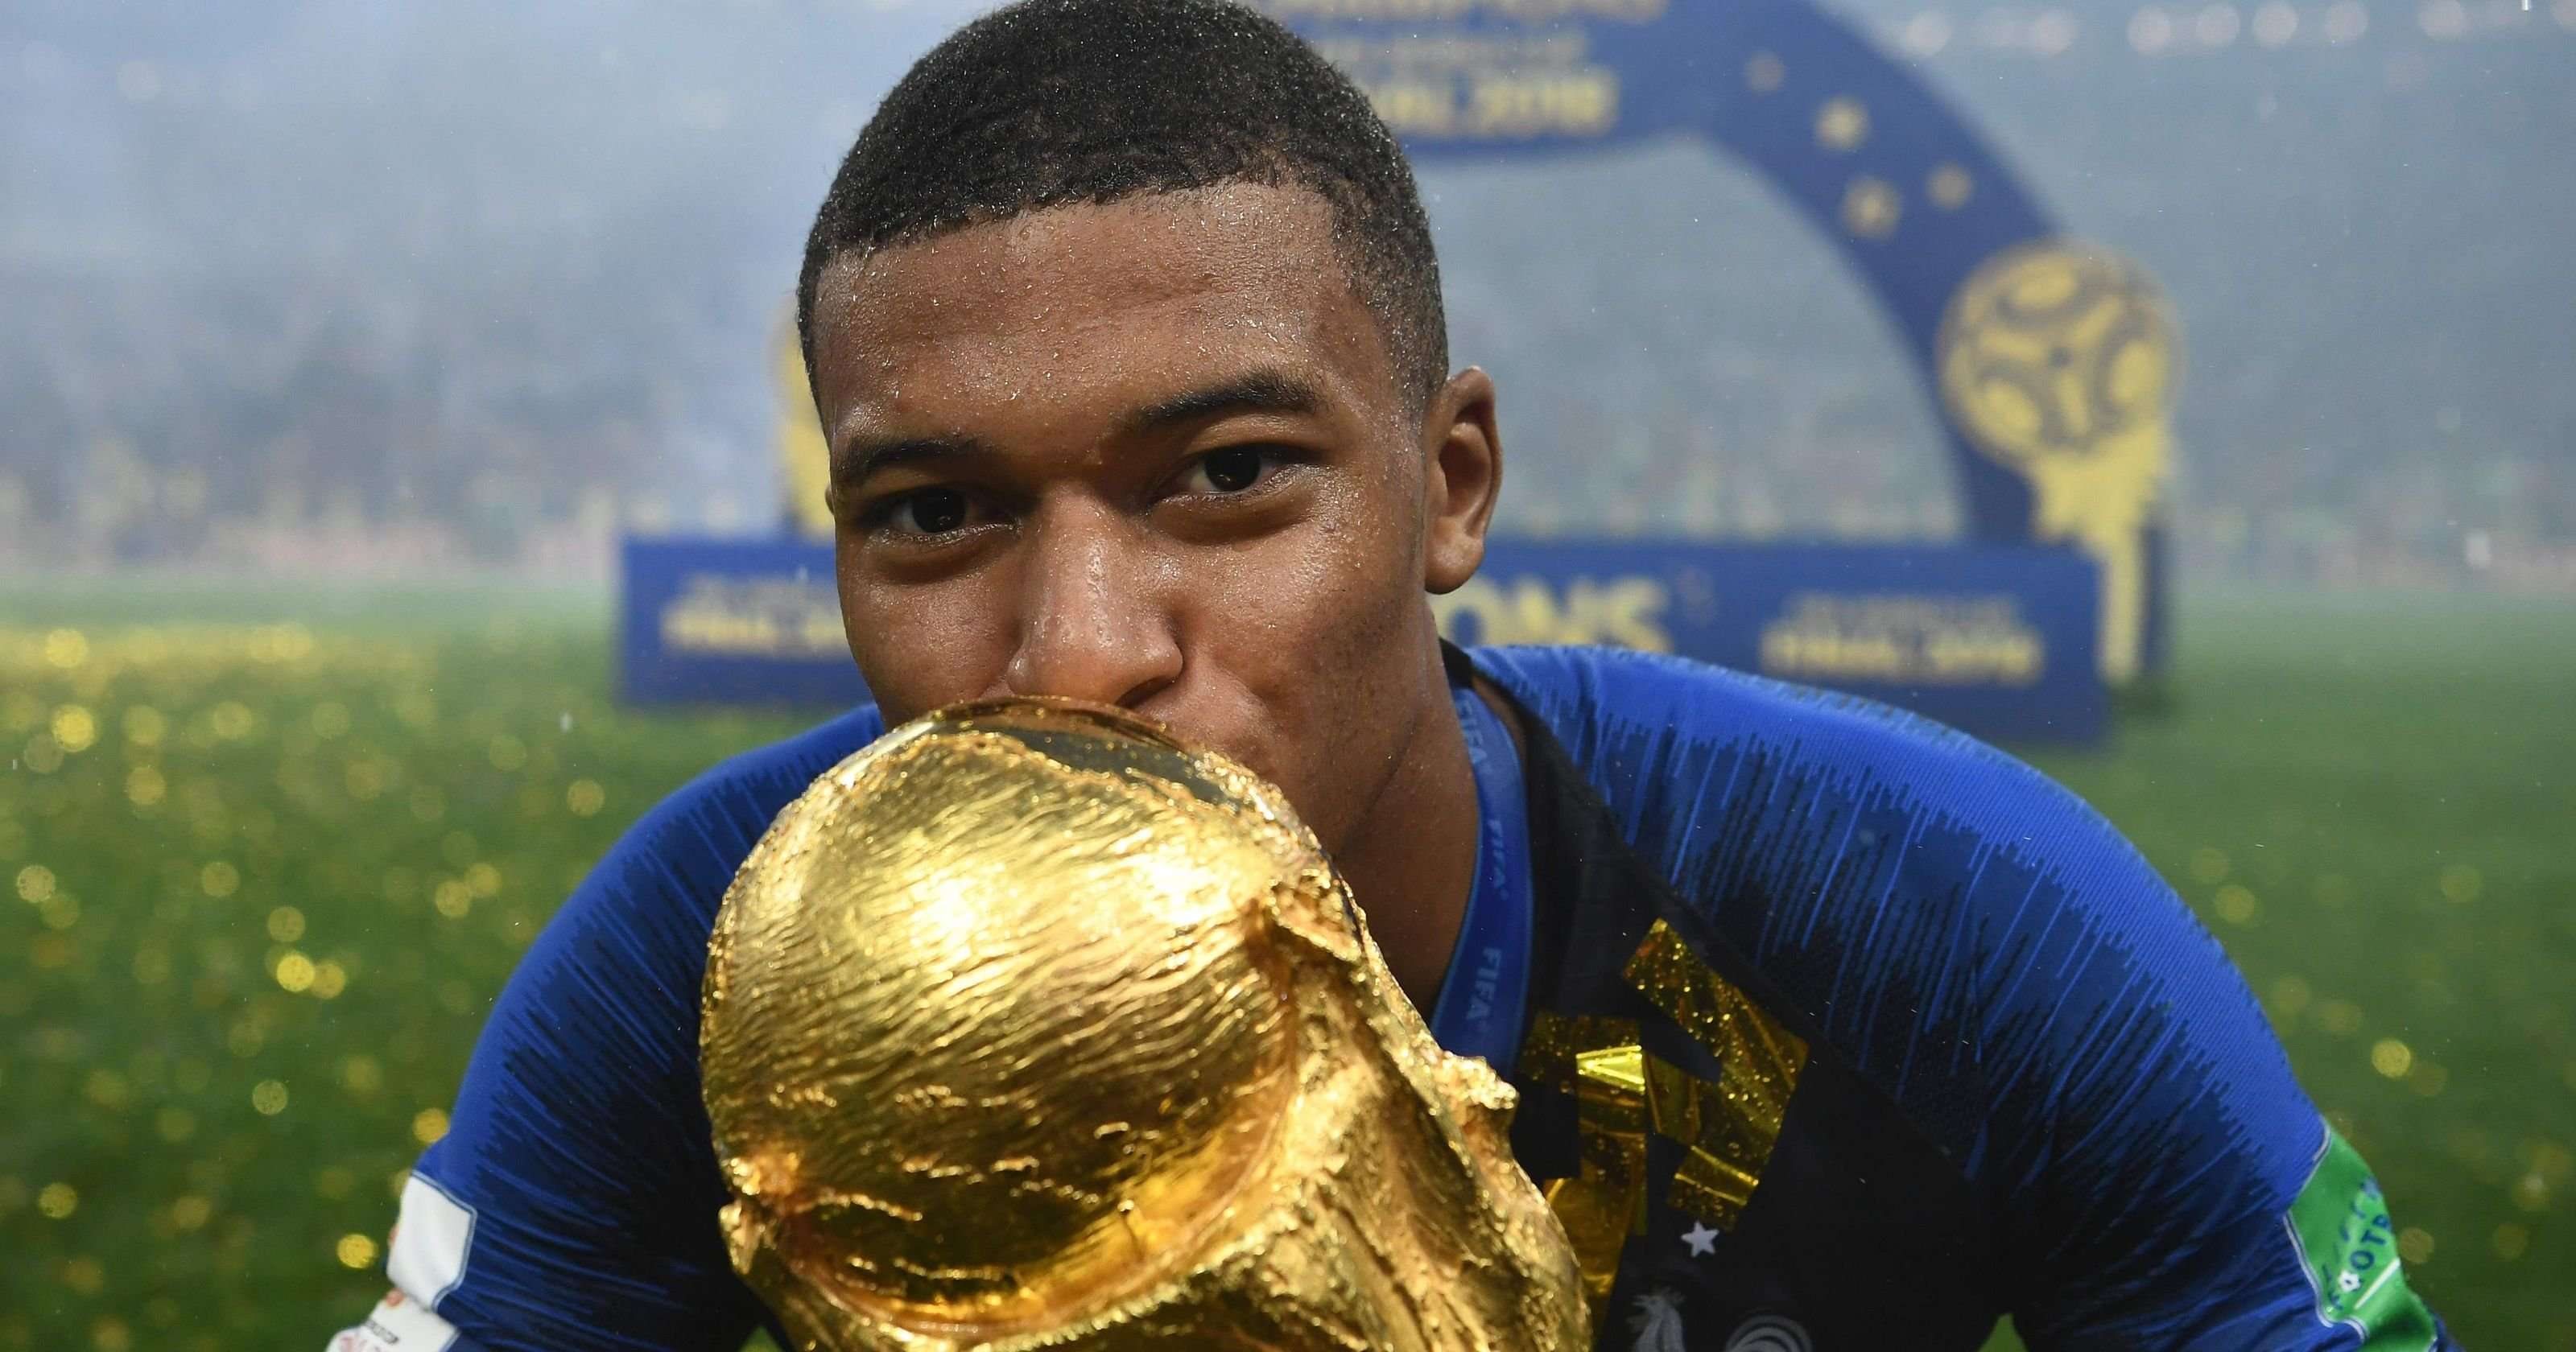 image for France's Kylian Mbappe, 19-year-old phenom, will donate World Cup earnings to charity